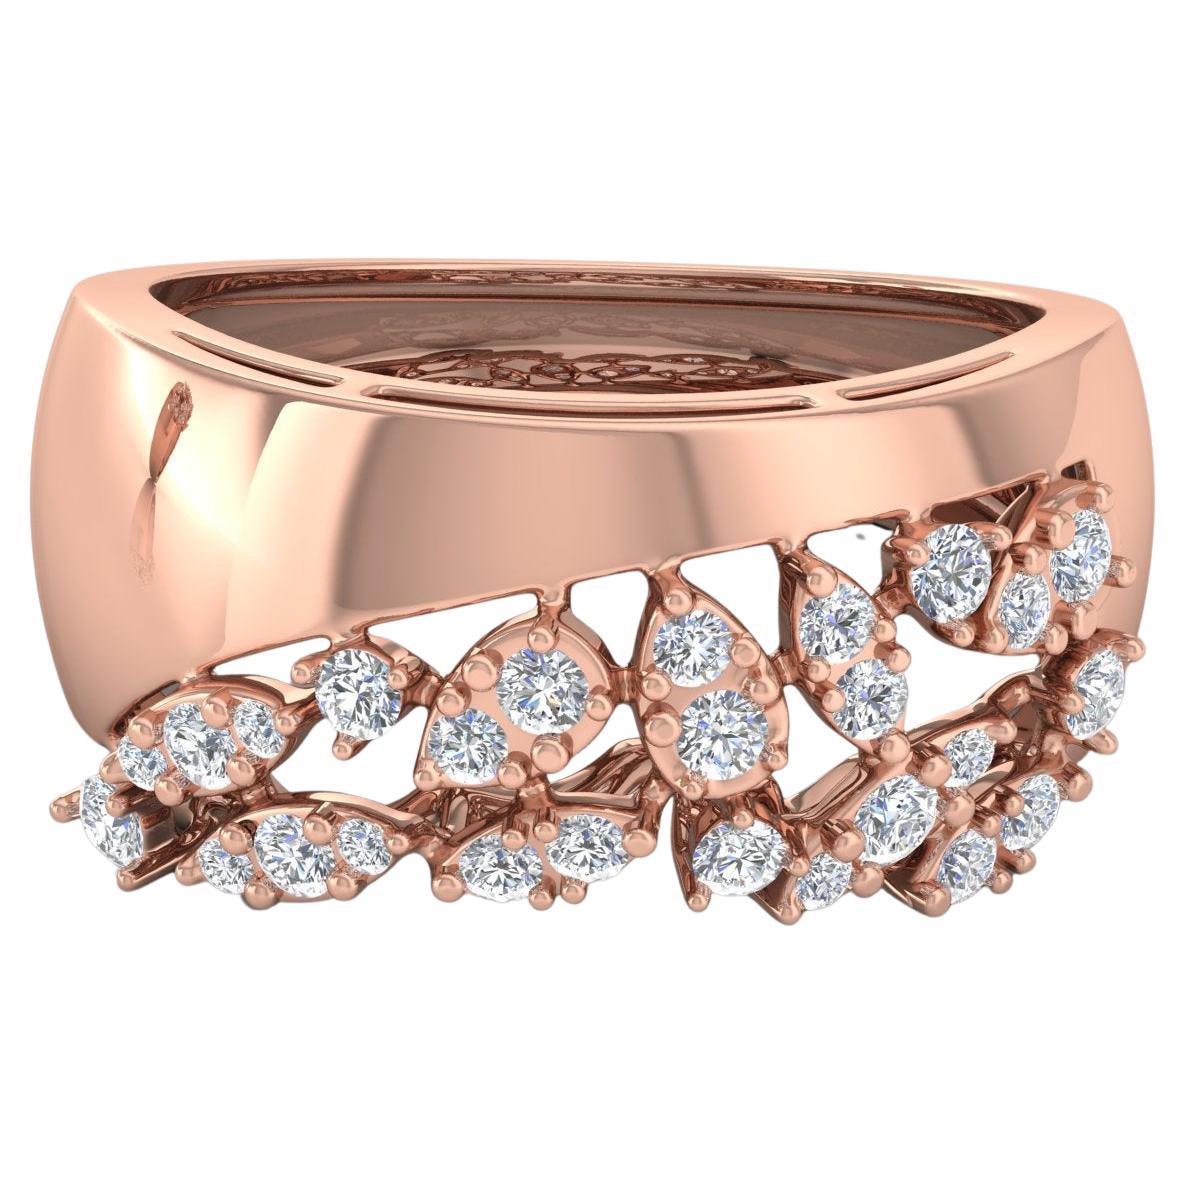 0.50 Carat SI Clarity HI Color Diamond Band Ring 18 Karat Rose Gold Fine Jewelry For Sale